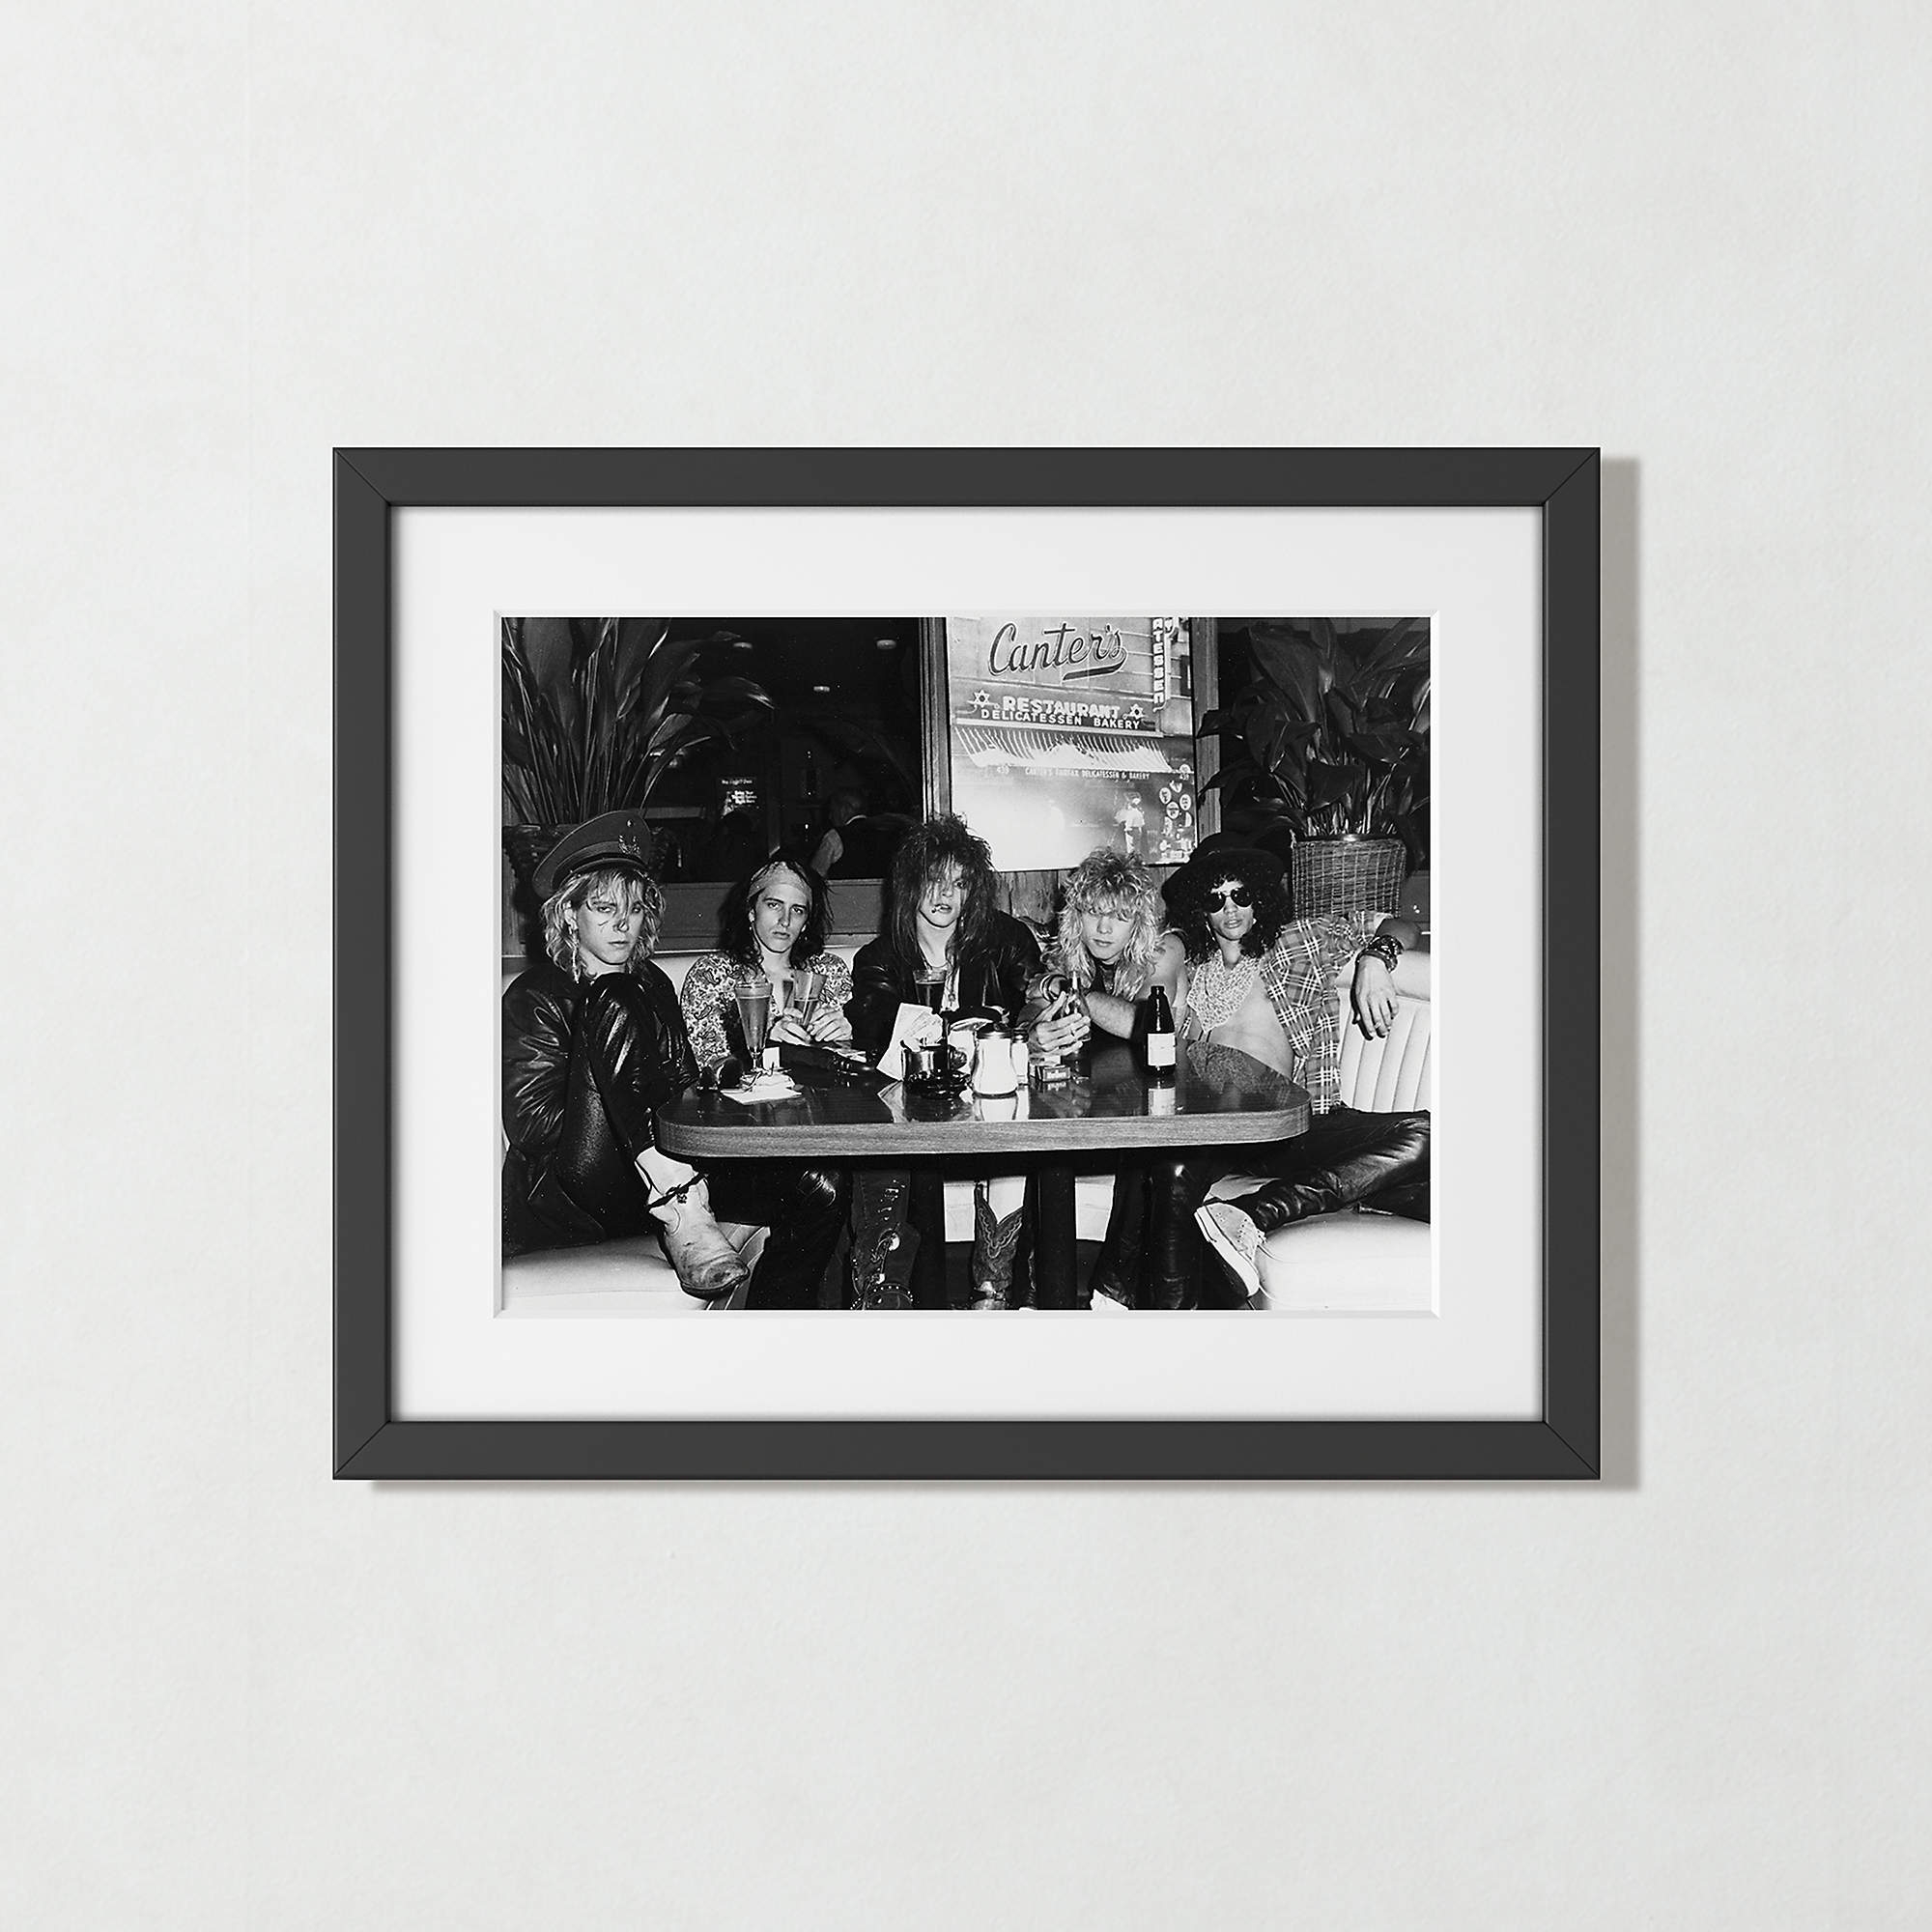 'Guns N' Roses At Canters Deli' with Black Frame 19.5"x15.5" - Image 0